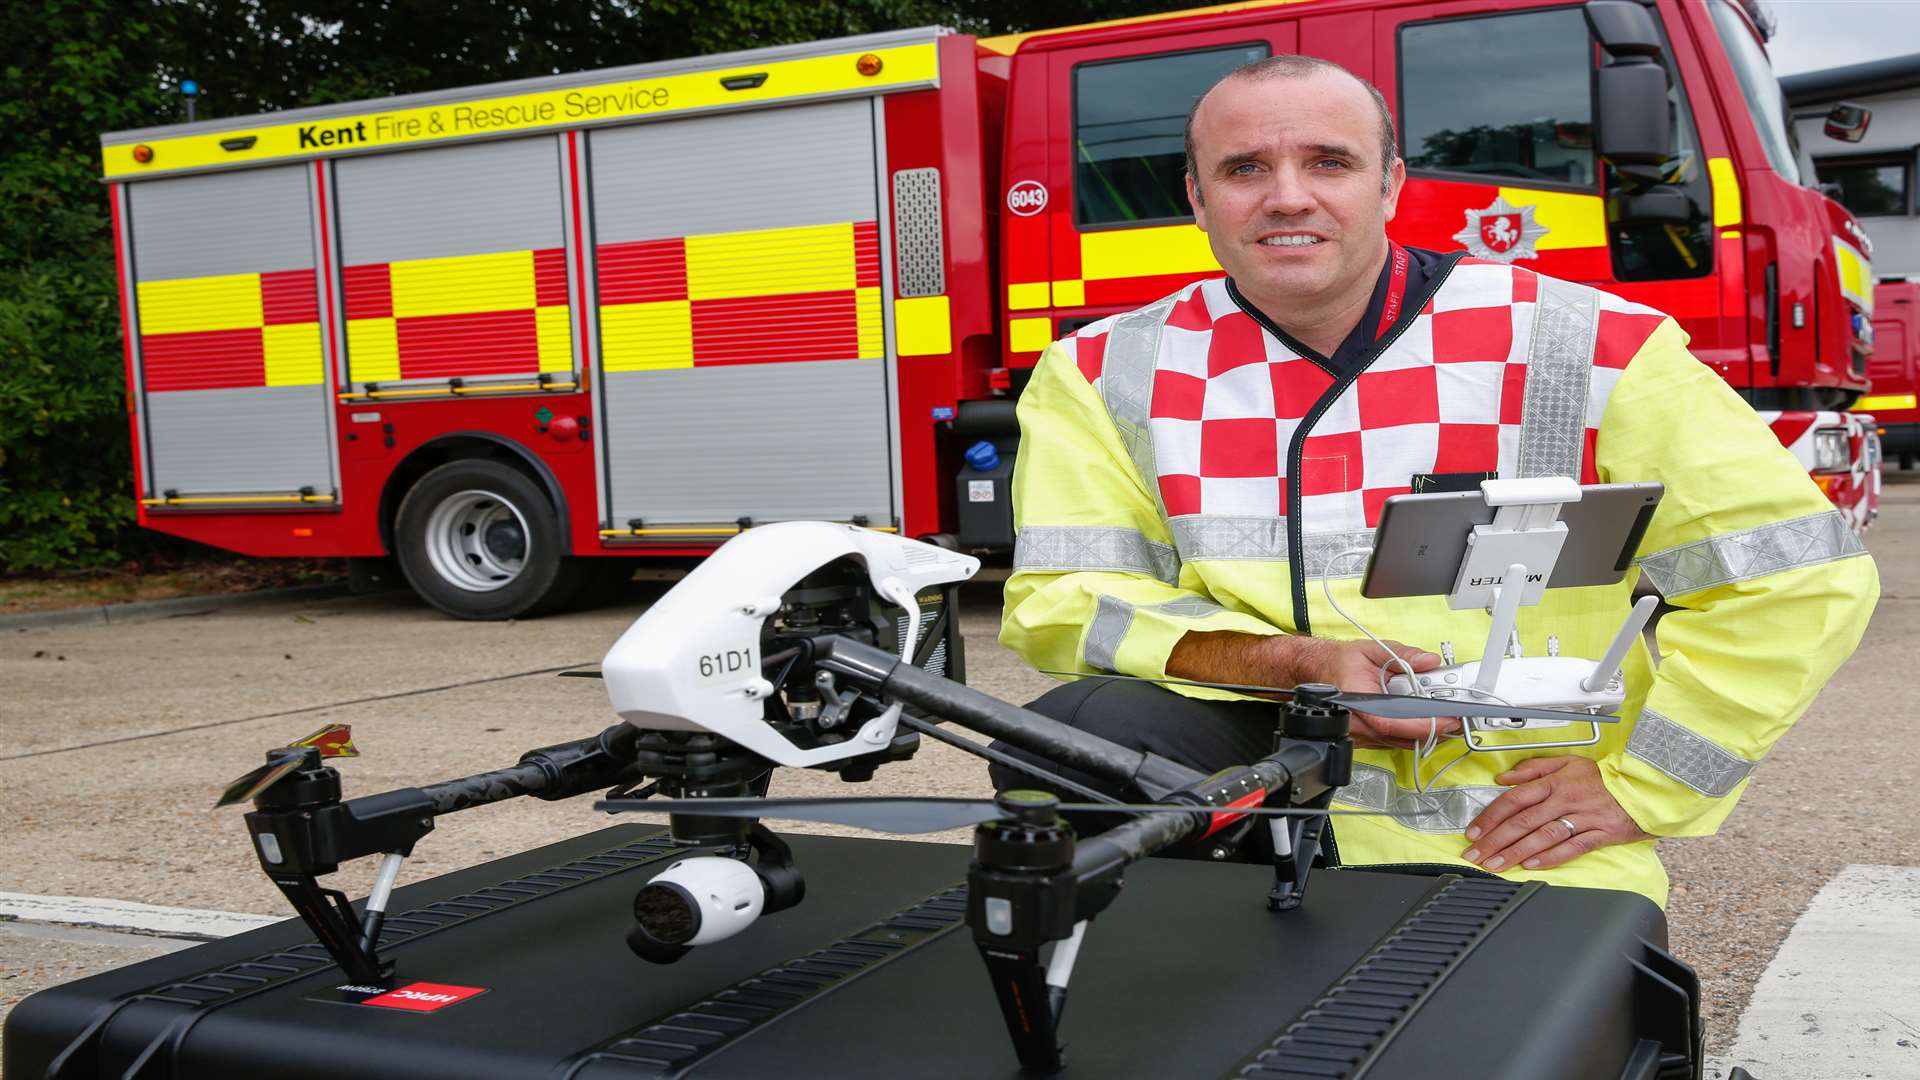 Maidstone Fire Station Manager Adam Green with the DJI Inspire 1 drone. Picture: Matthew Walker